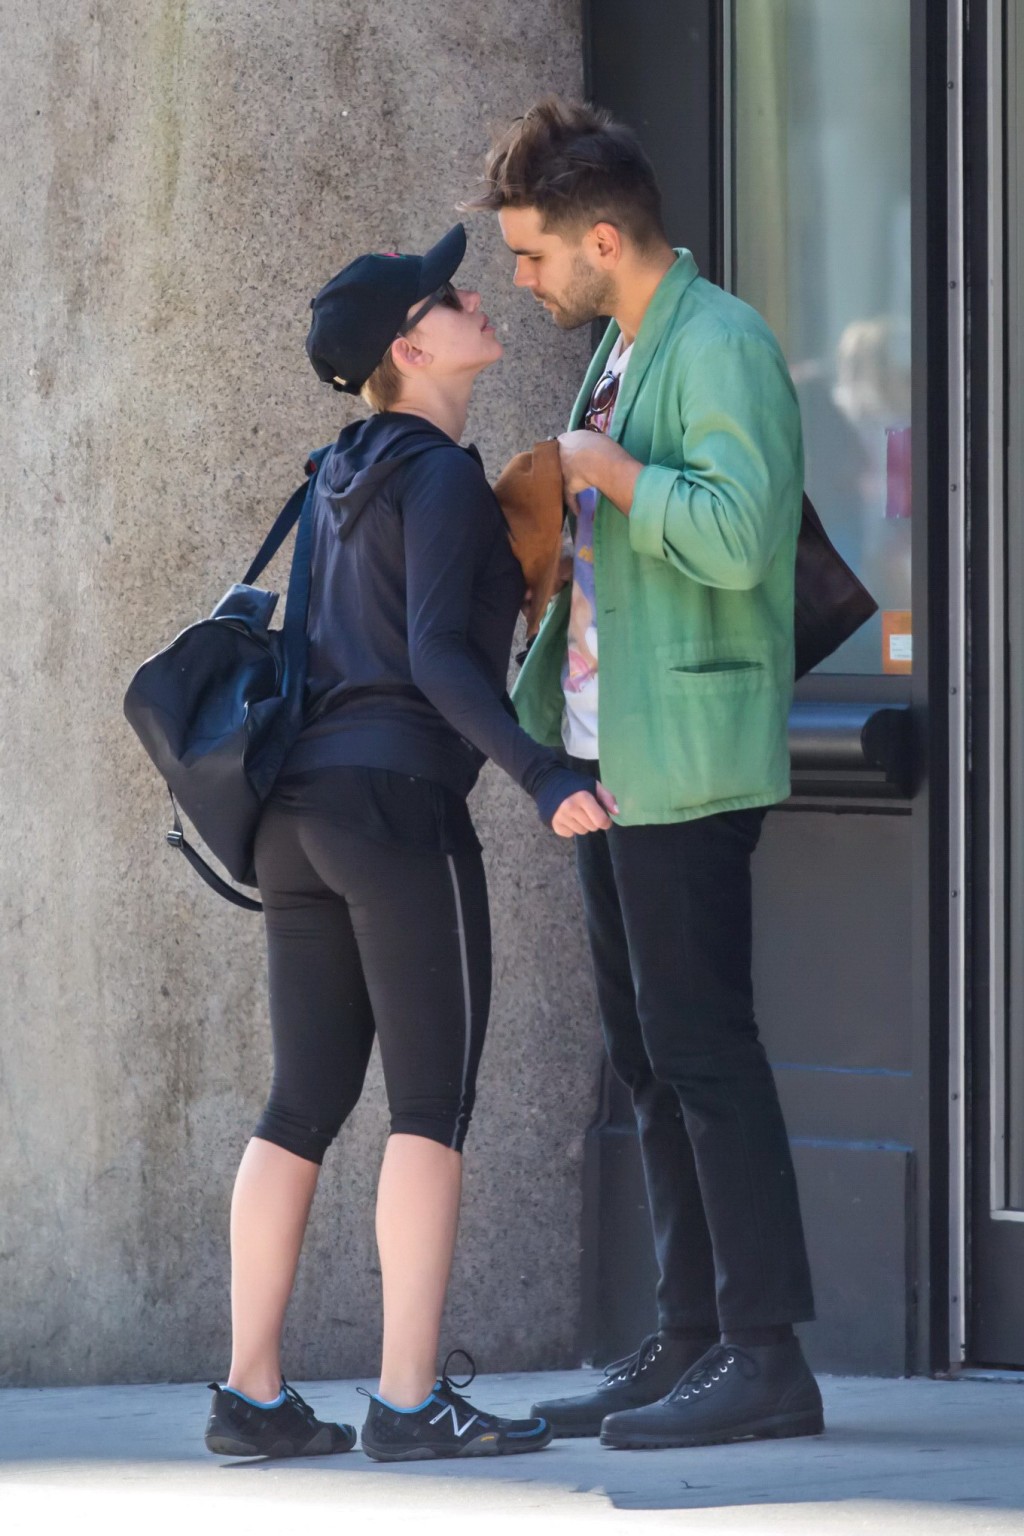 Scarlett Johansson in black leggings getting ass groped while make out in NYC